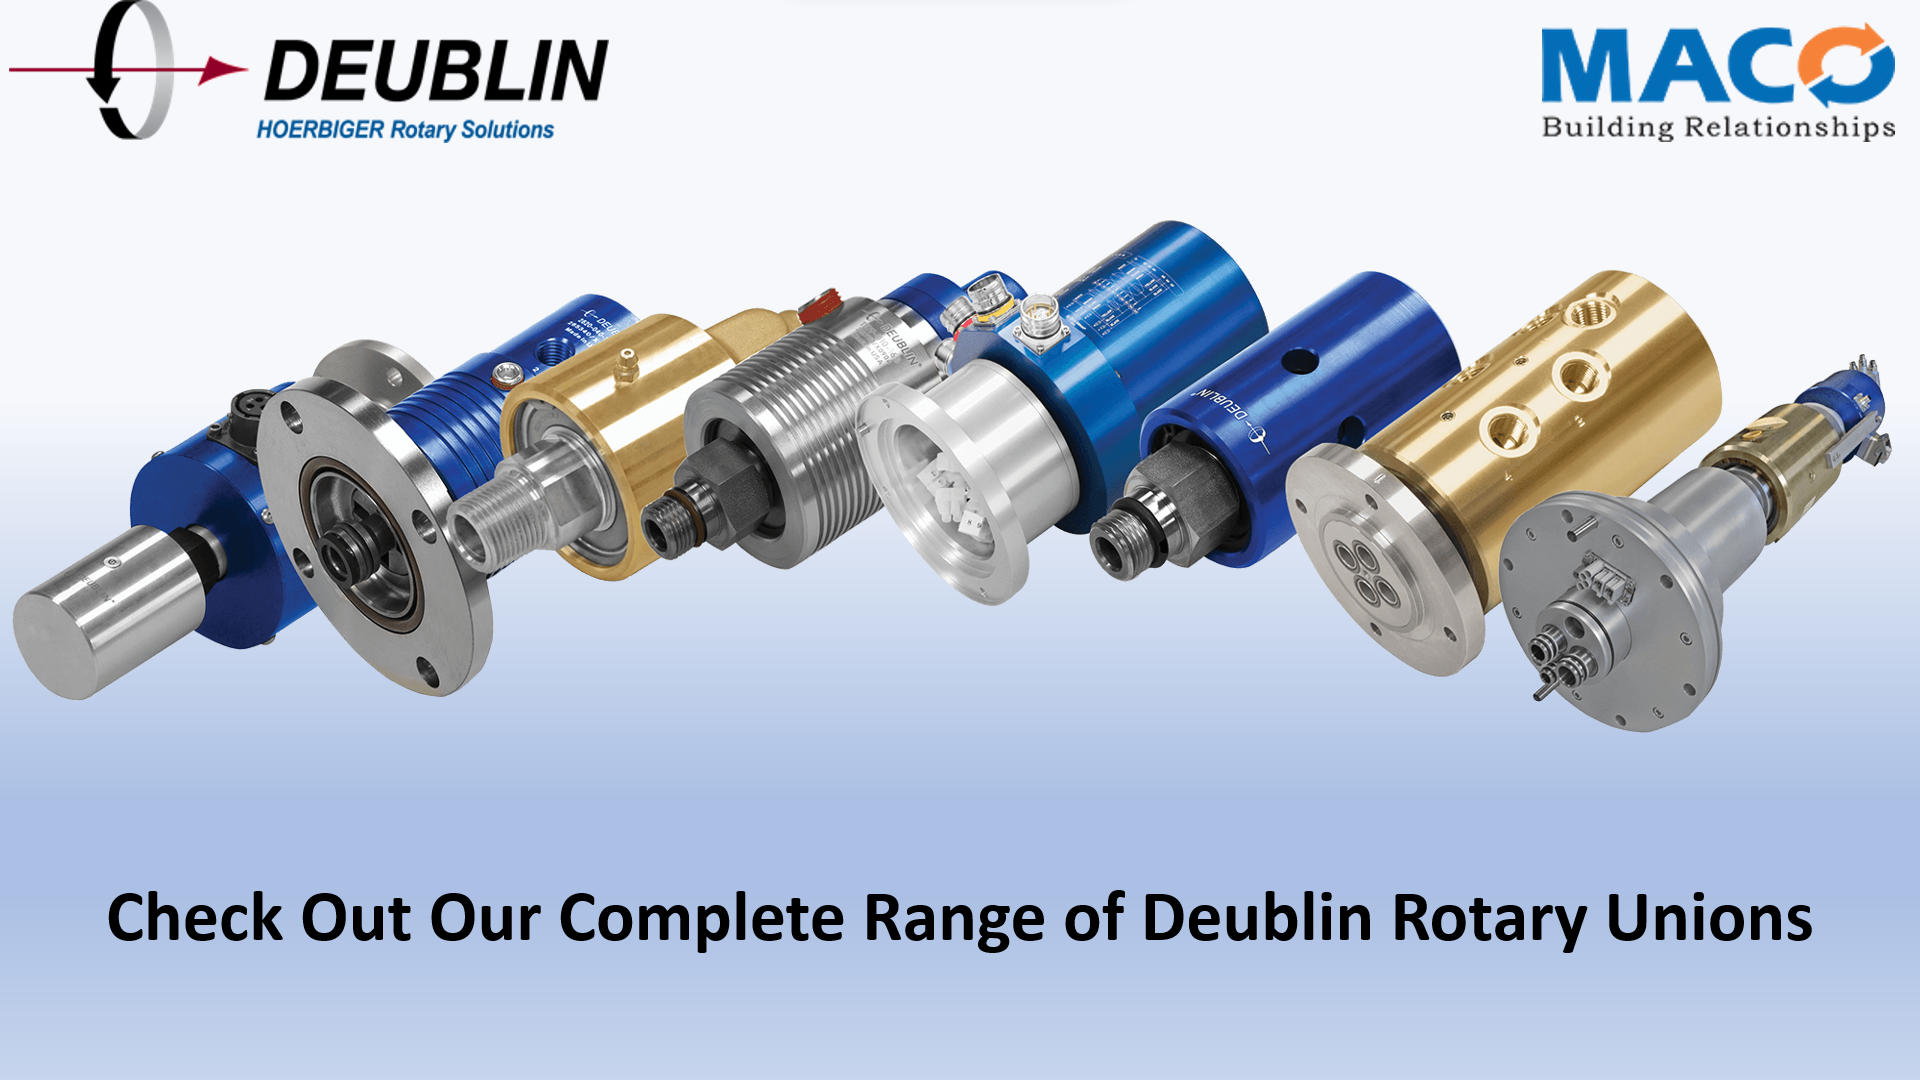 Deublin Rotary Unions offered by Maco Corporation in India